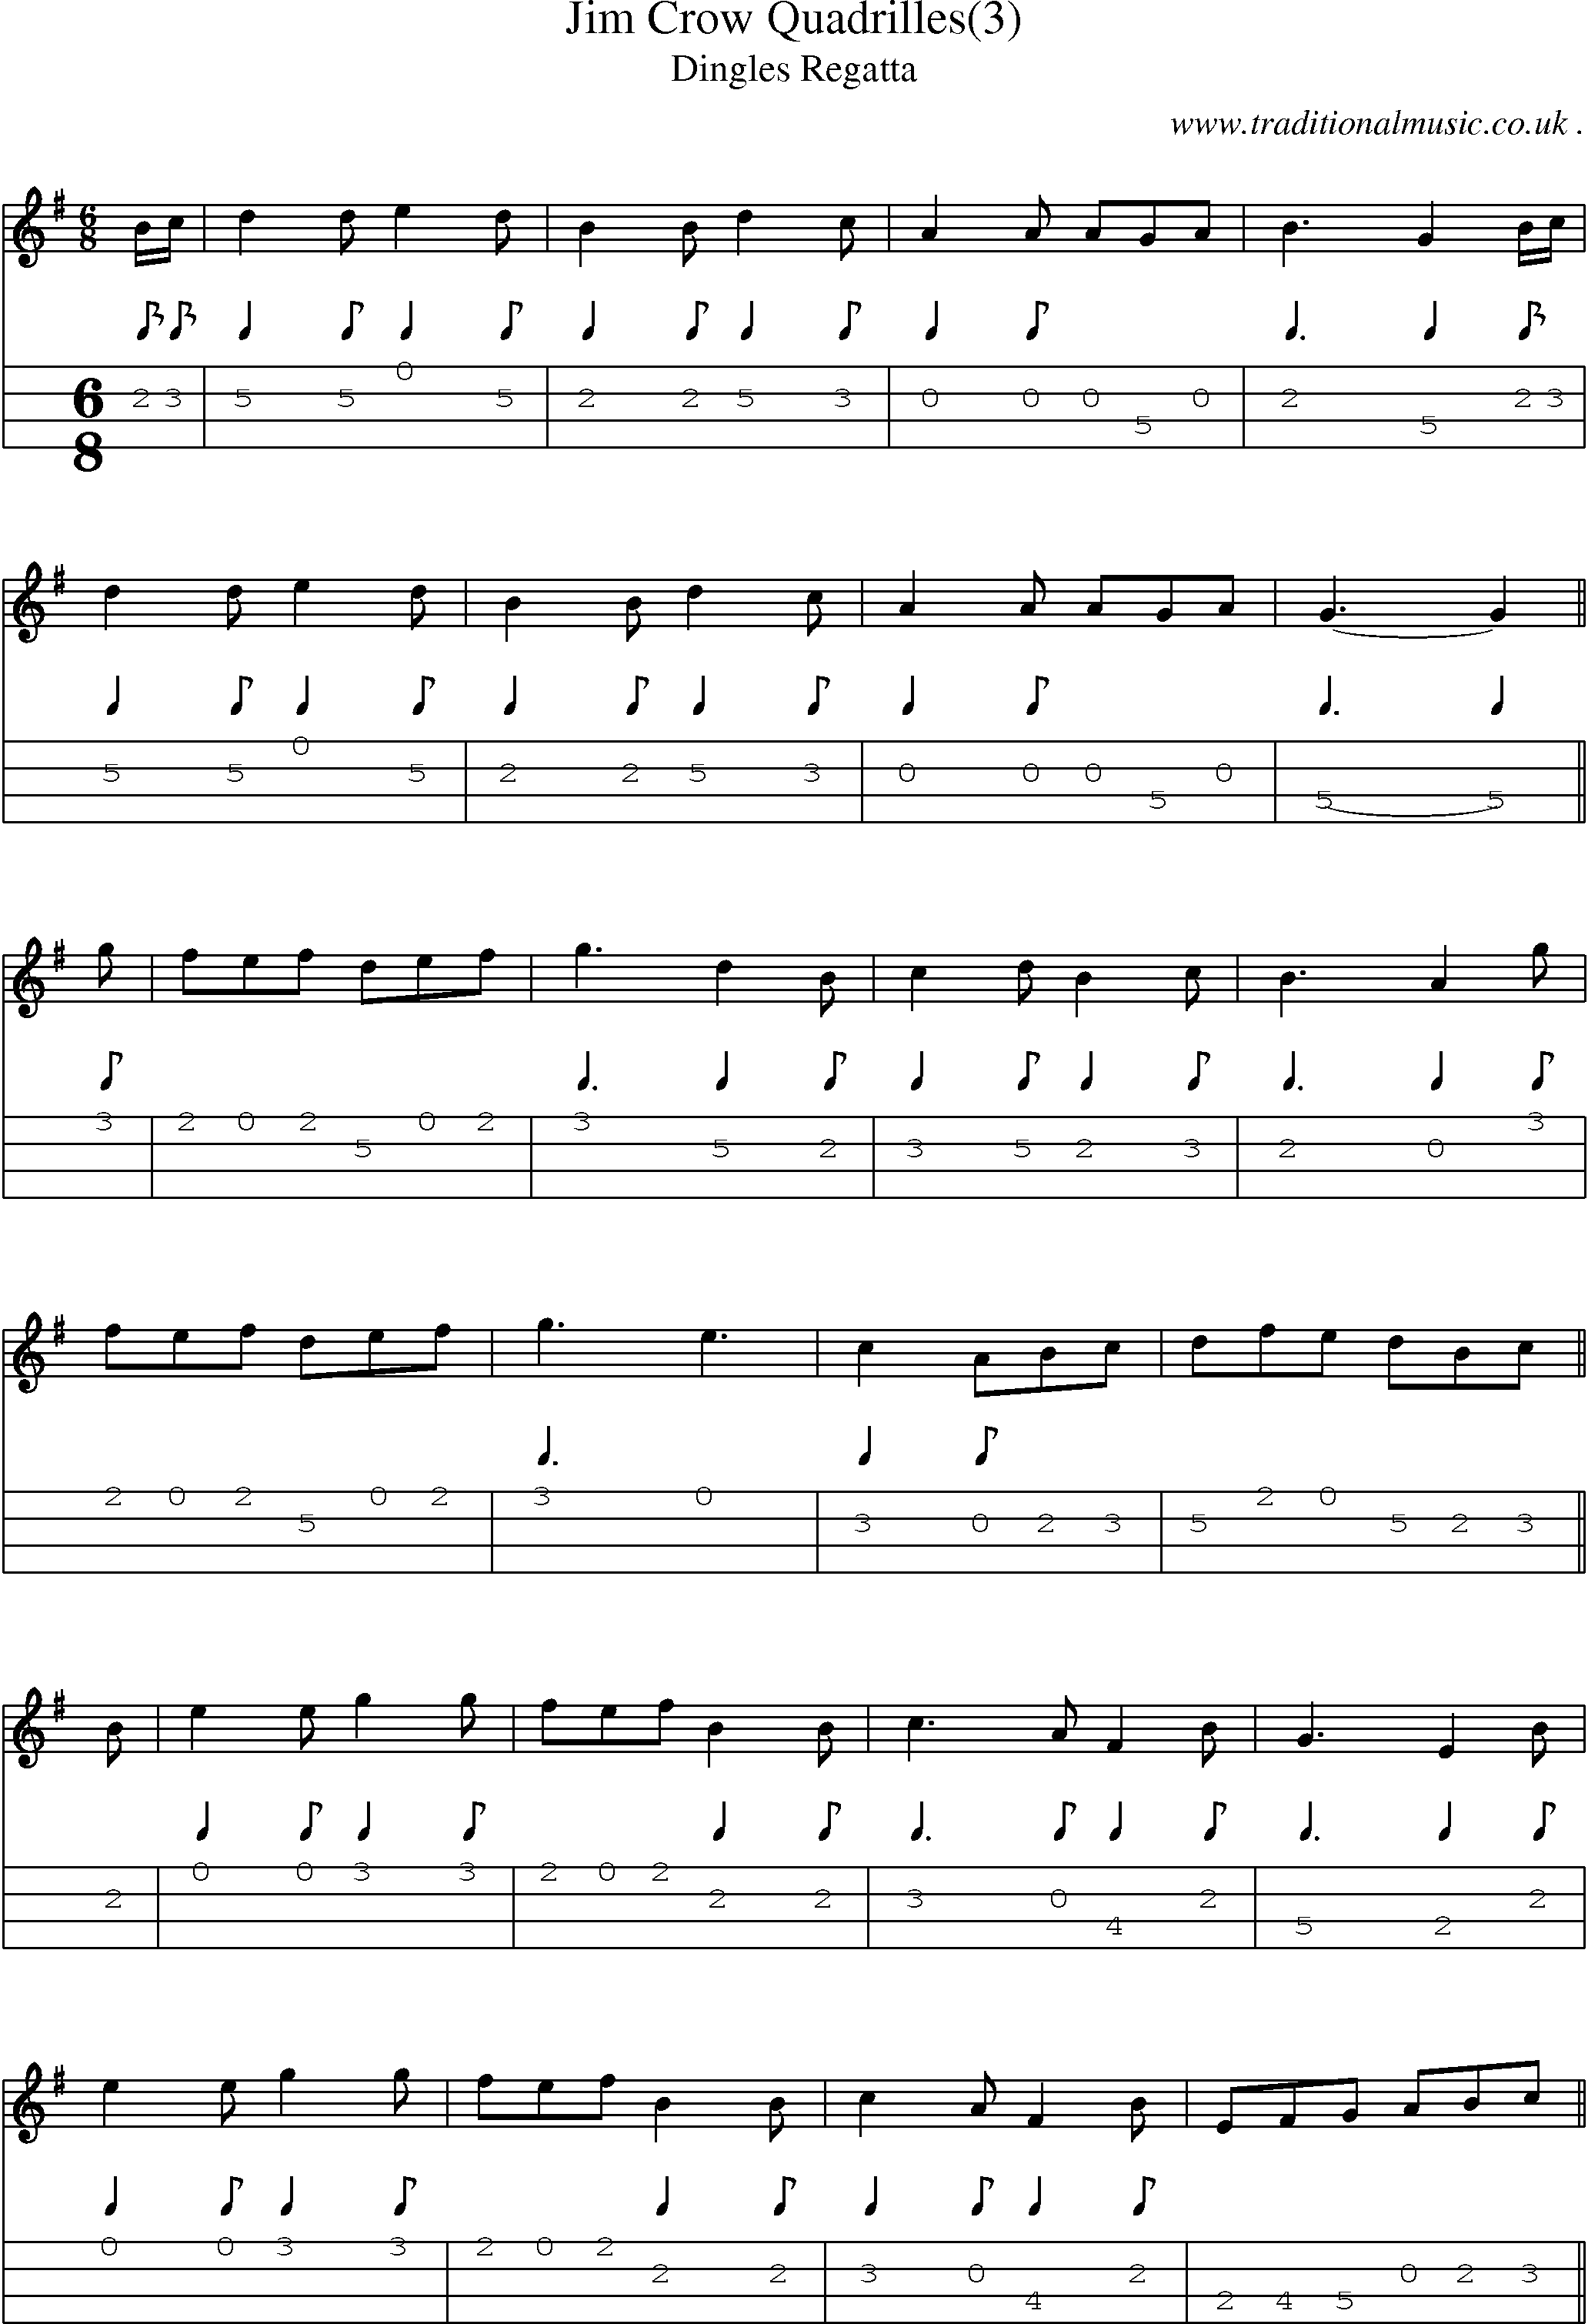 Sheet-Music and Mandolin Tabs for Jim Crow Quadrilles(3)